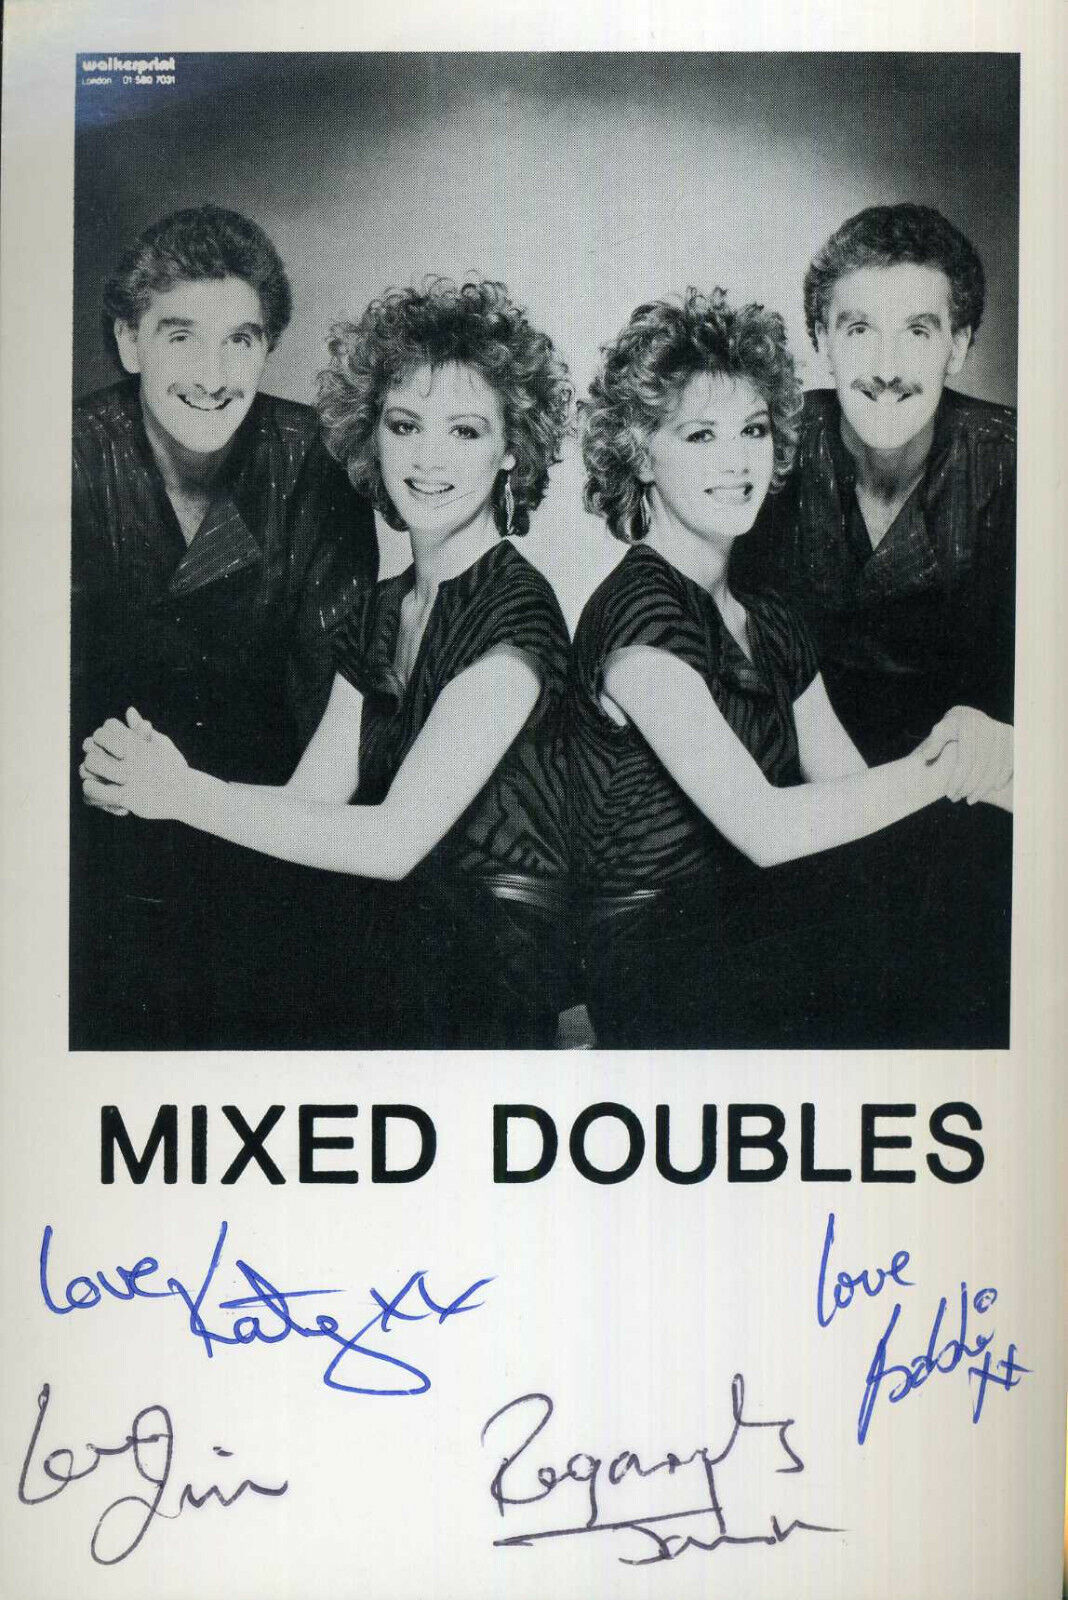 MIXED DOUBLES Signed Photo Poster paintinggraph - Pop / Vocalist Group - TWINS - reprint